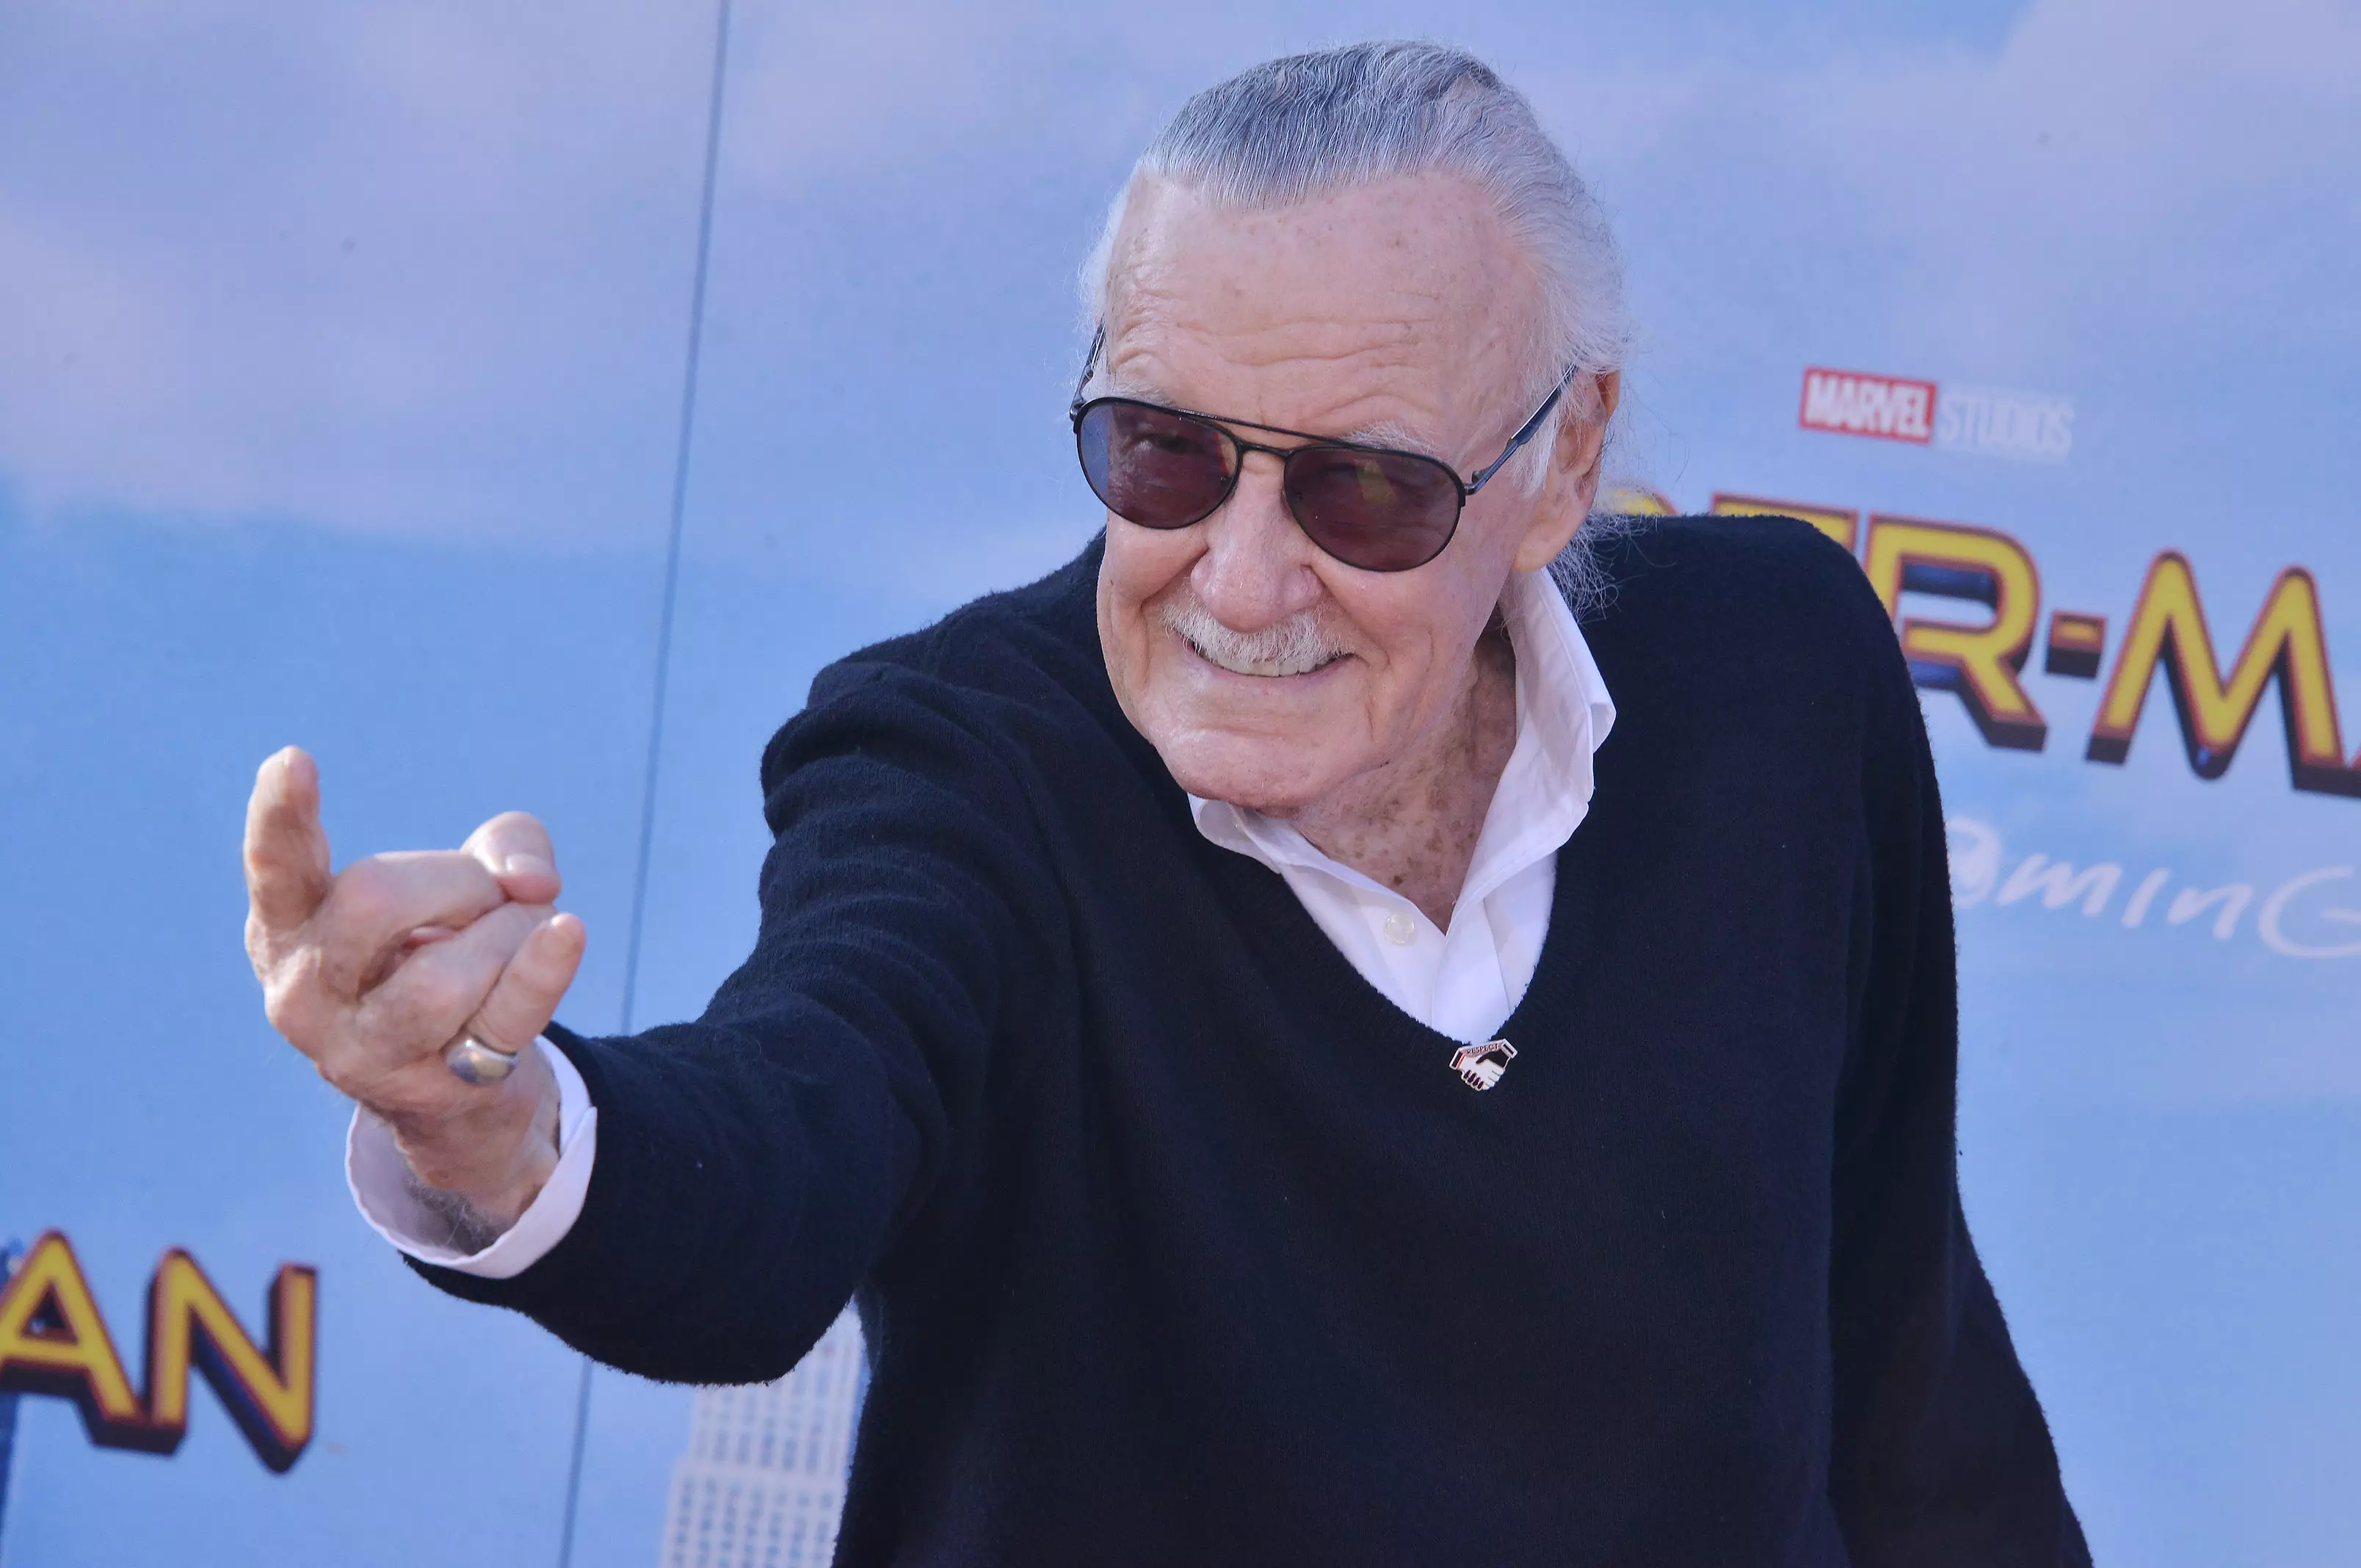 Marvel's Stan Lee, who has died aged 95.